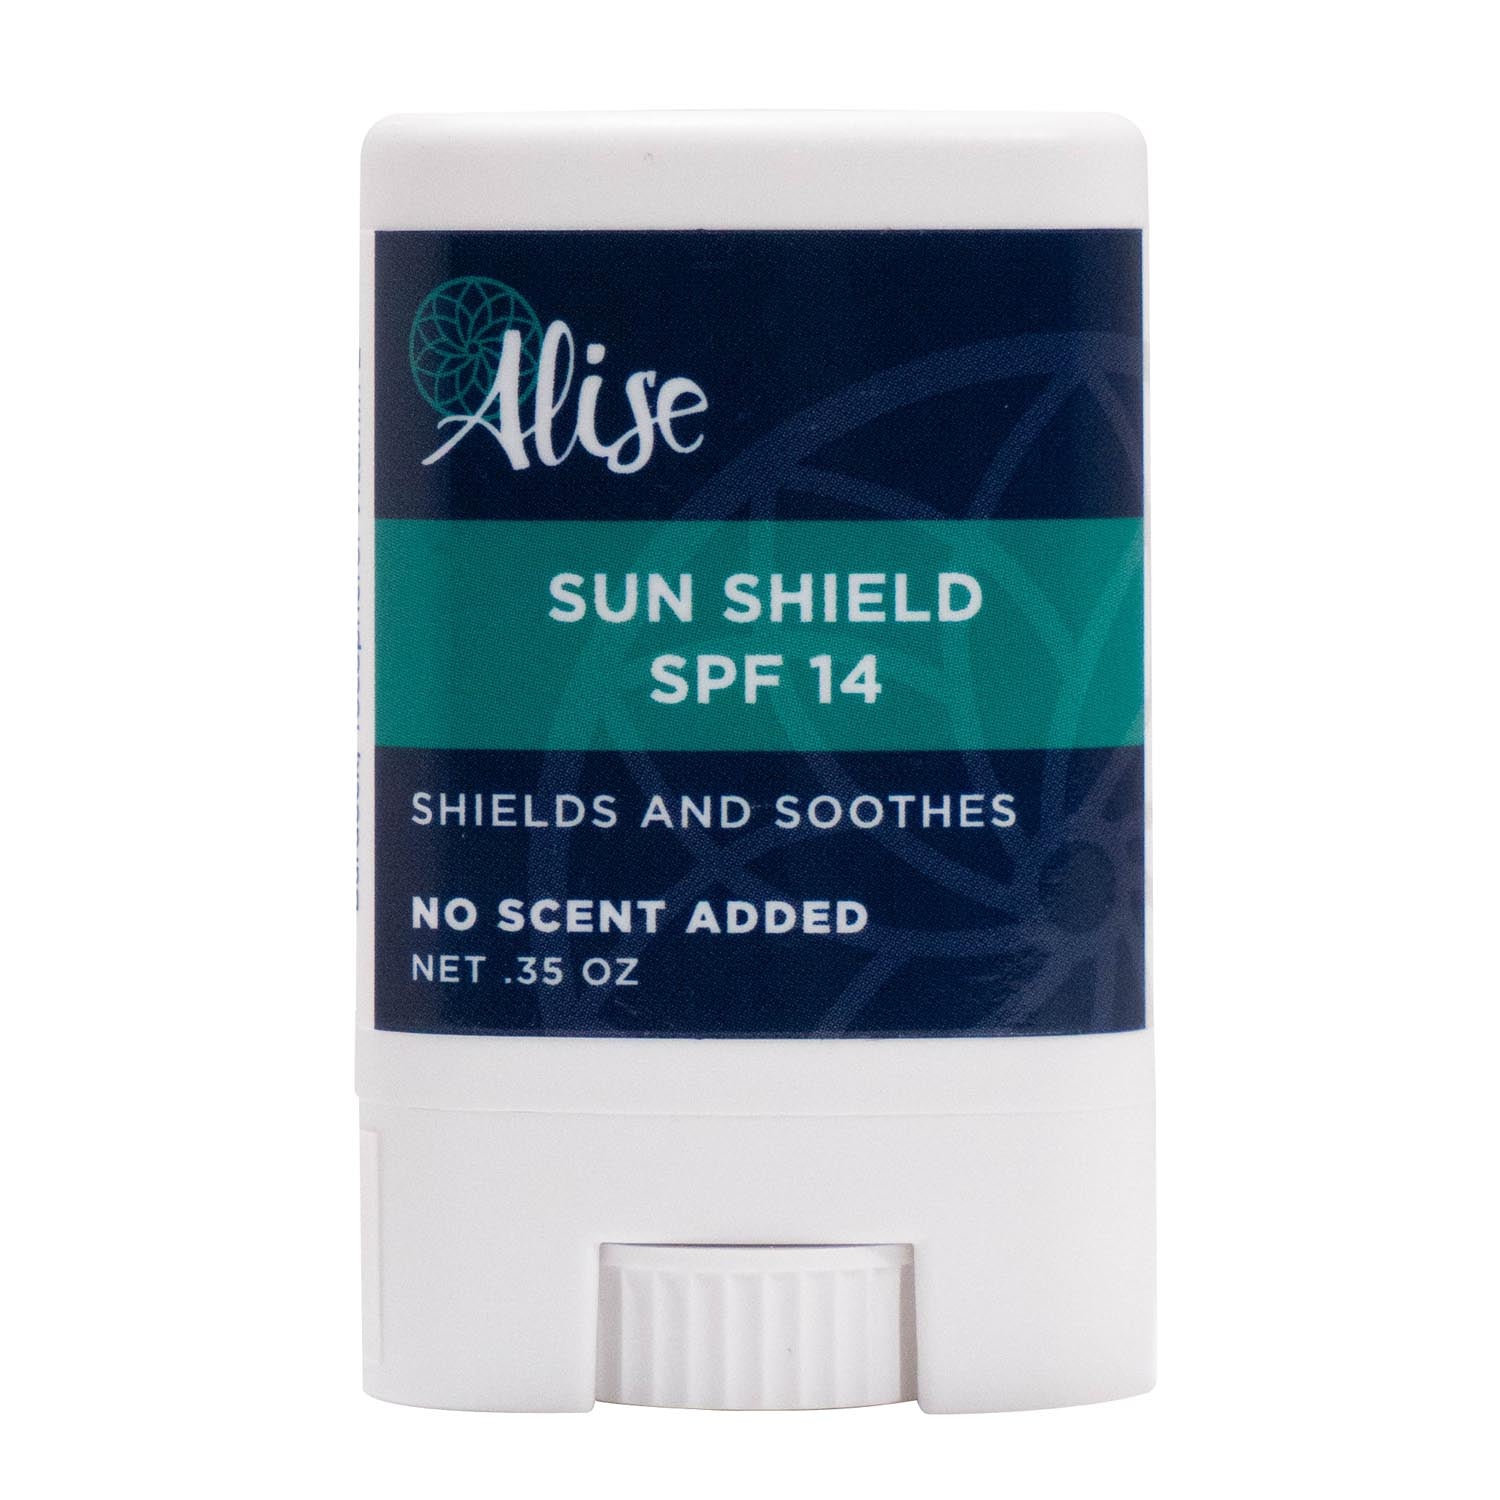 Sun Shield SPF No Scent Added .35oz Rub On handcrafted by Alise Body Care